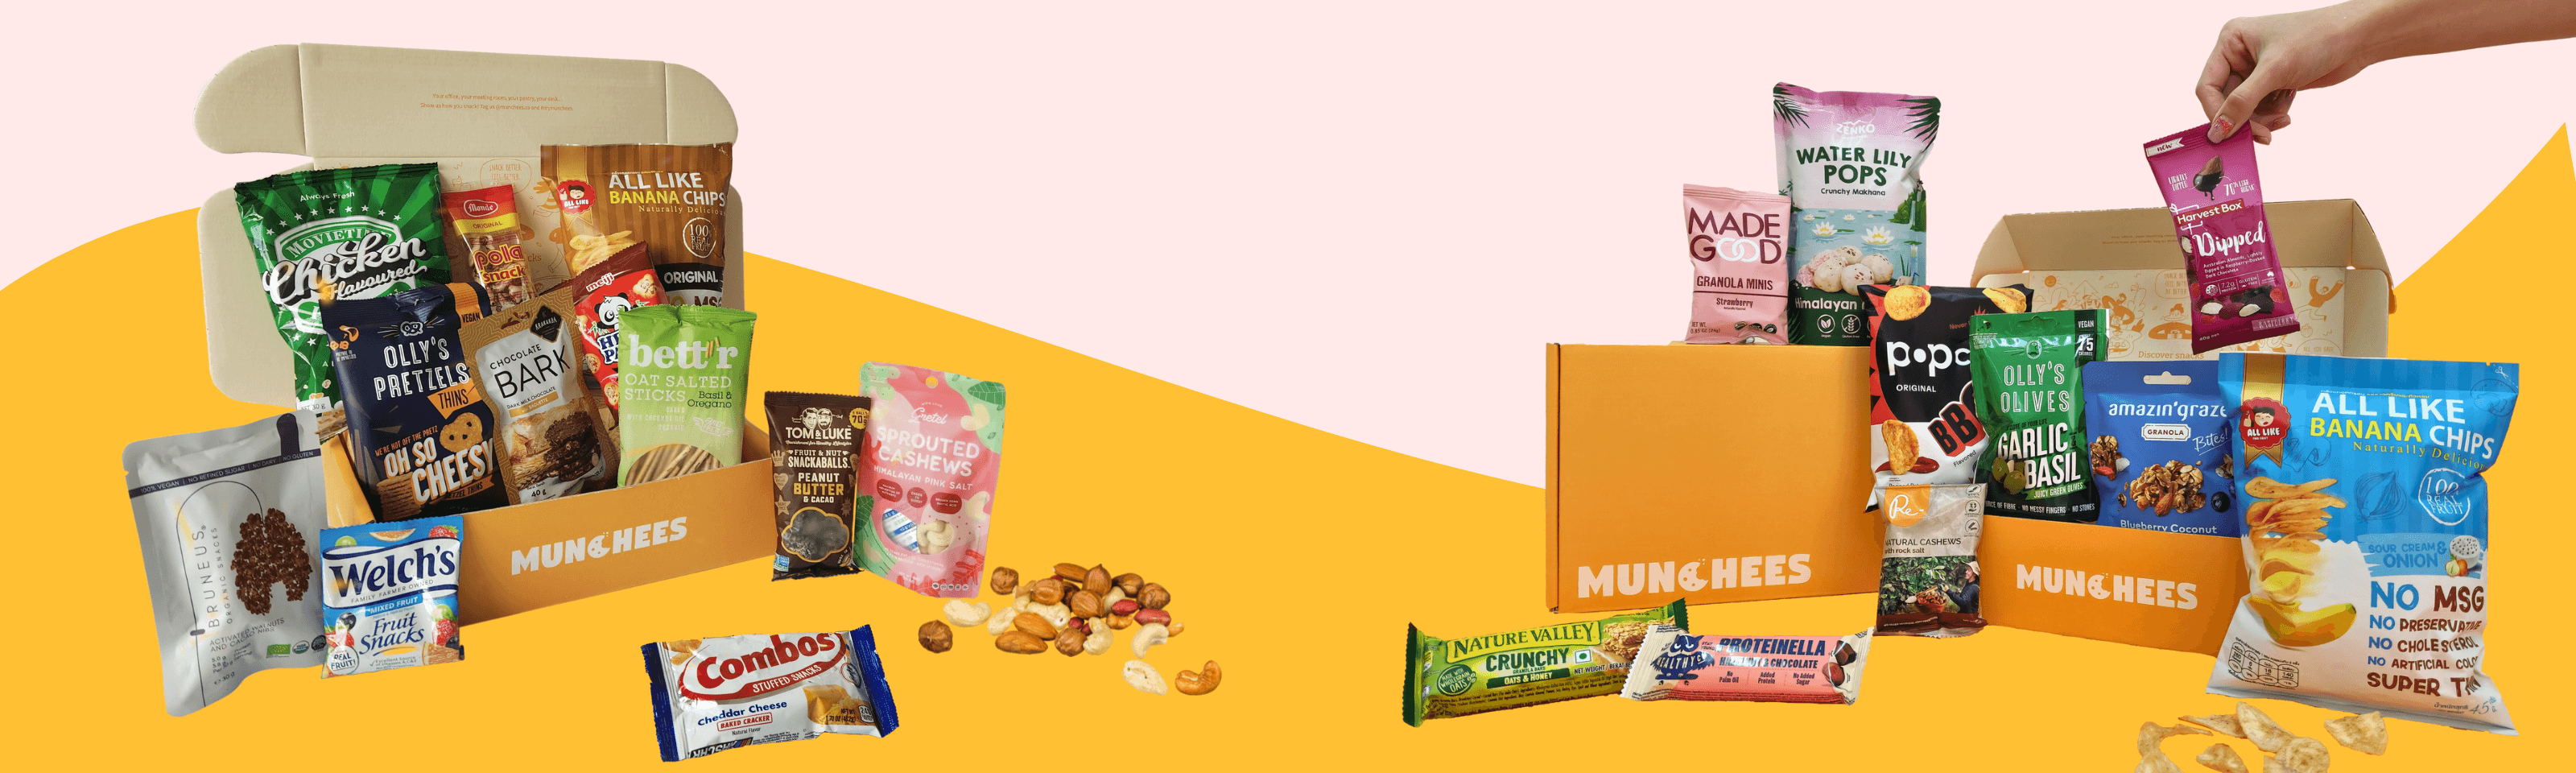 banner for build a munchees snacks box gifting and office pantry snack stocking in singapore